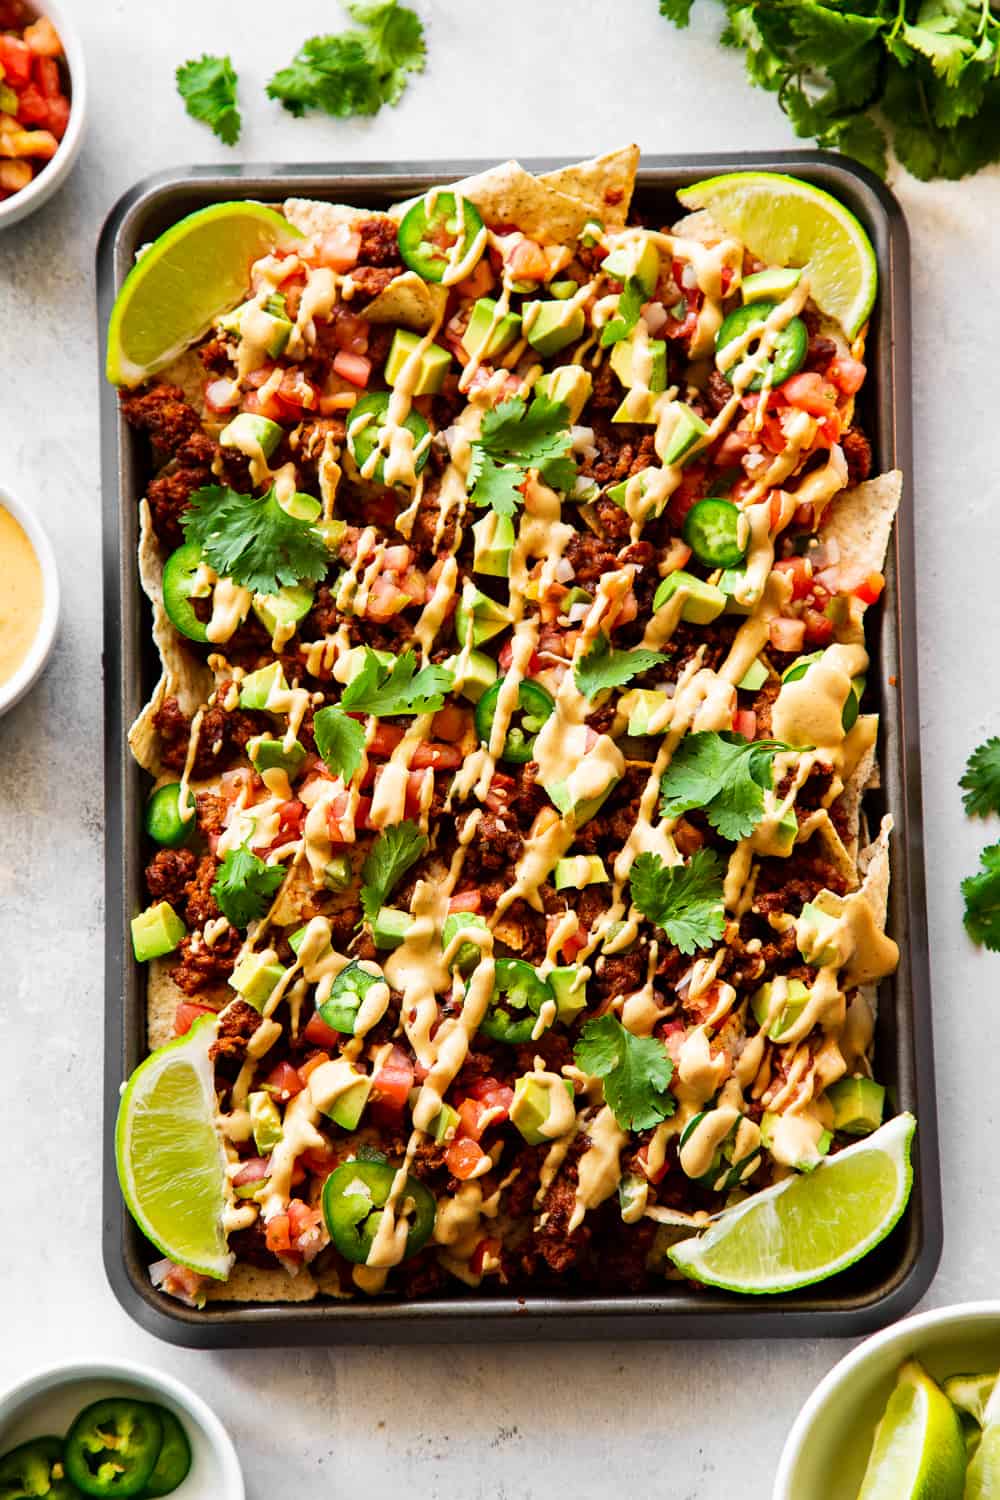 These quick and easy grain free, dairy free paleo nachos don’t sacrifice anything - they’re loaded with chorizo, pico de gallo, avocados and the easiest nacho “cheese” sauce! Great as an appetizer or snack but works well for dinner too! #paleo #cleaneating #dairyfree